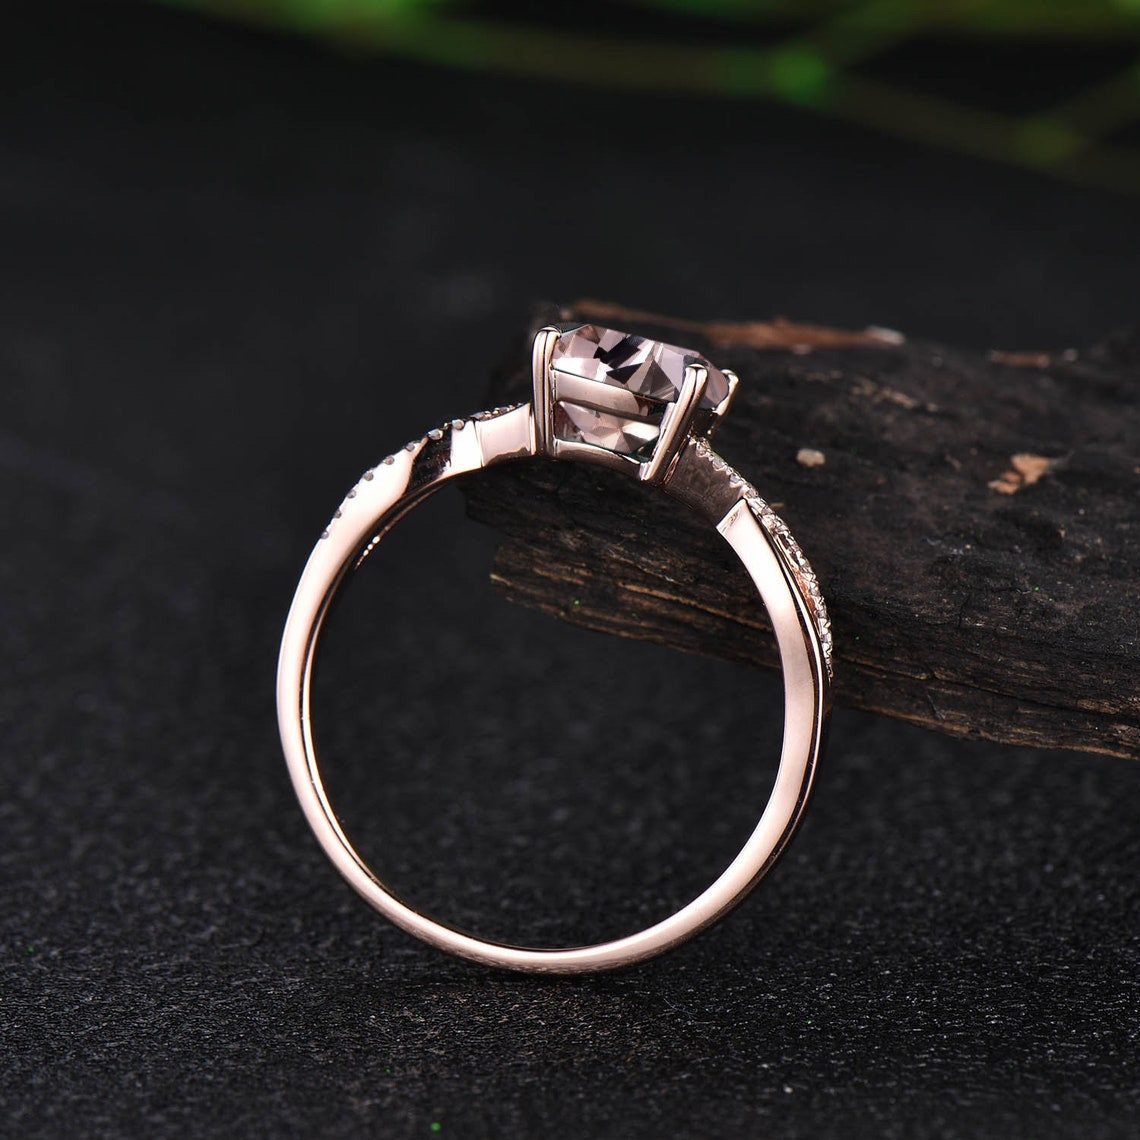 Vintage cushion cut morganite engagement ring solid 14k rose gold infinity Twisted half eternity diamond ring anniversary ring for women